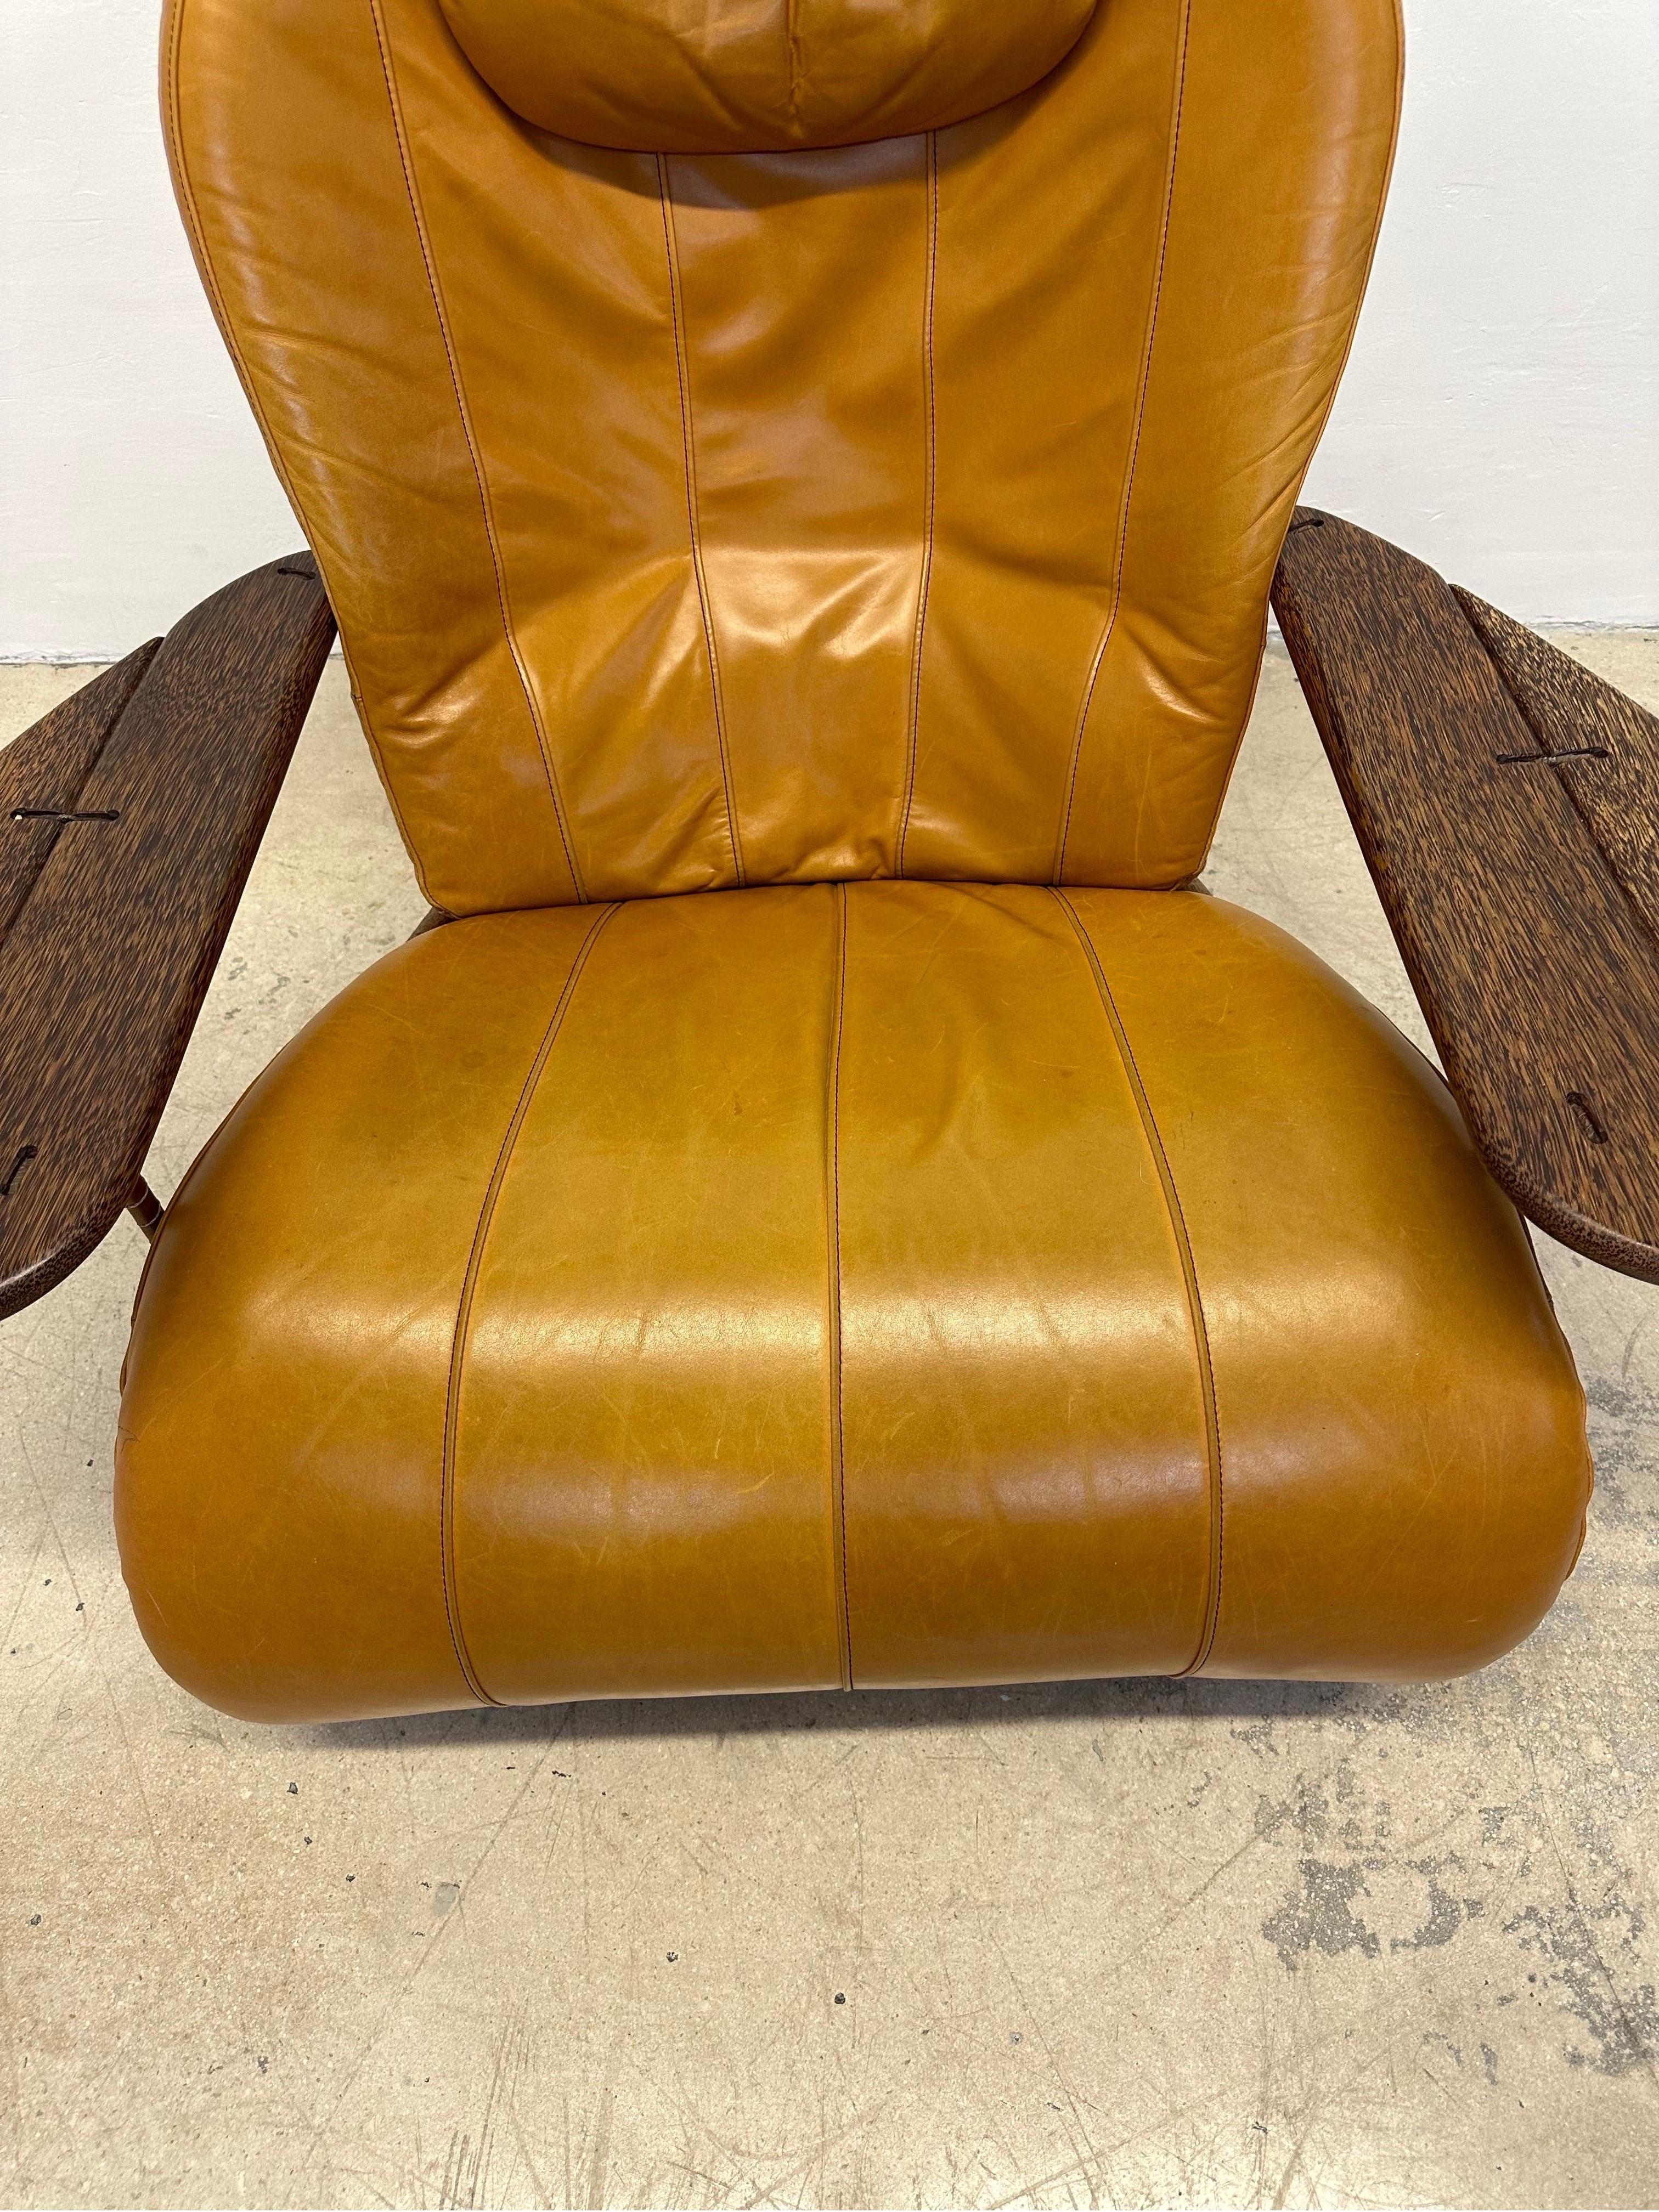 Pacific Green Havana Palmwood and Leather Lounge Chair For Sale 2